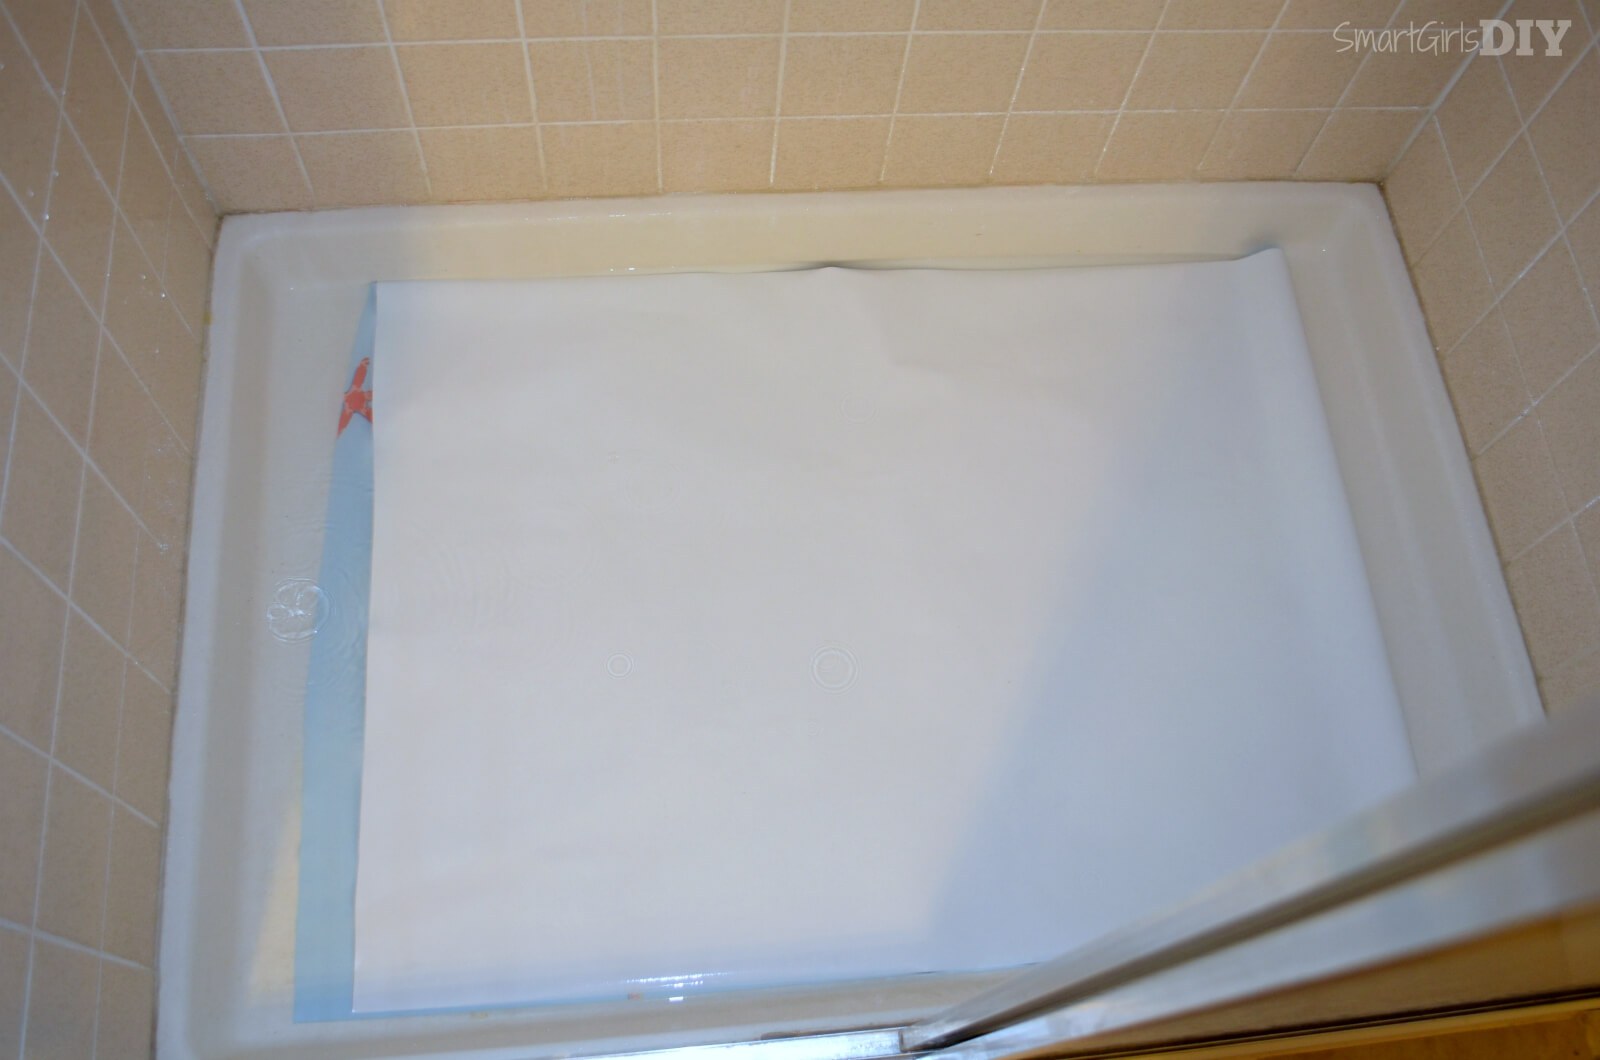 Soaking extra wide wallpaper roll in show pan    worked like a charm